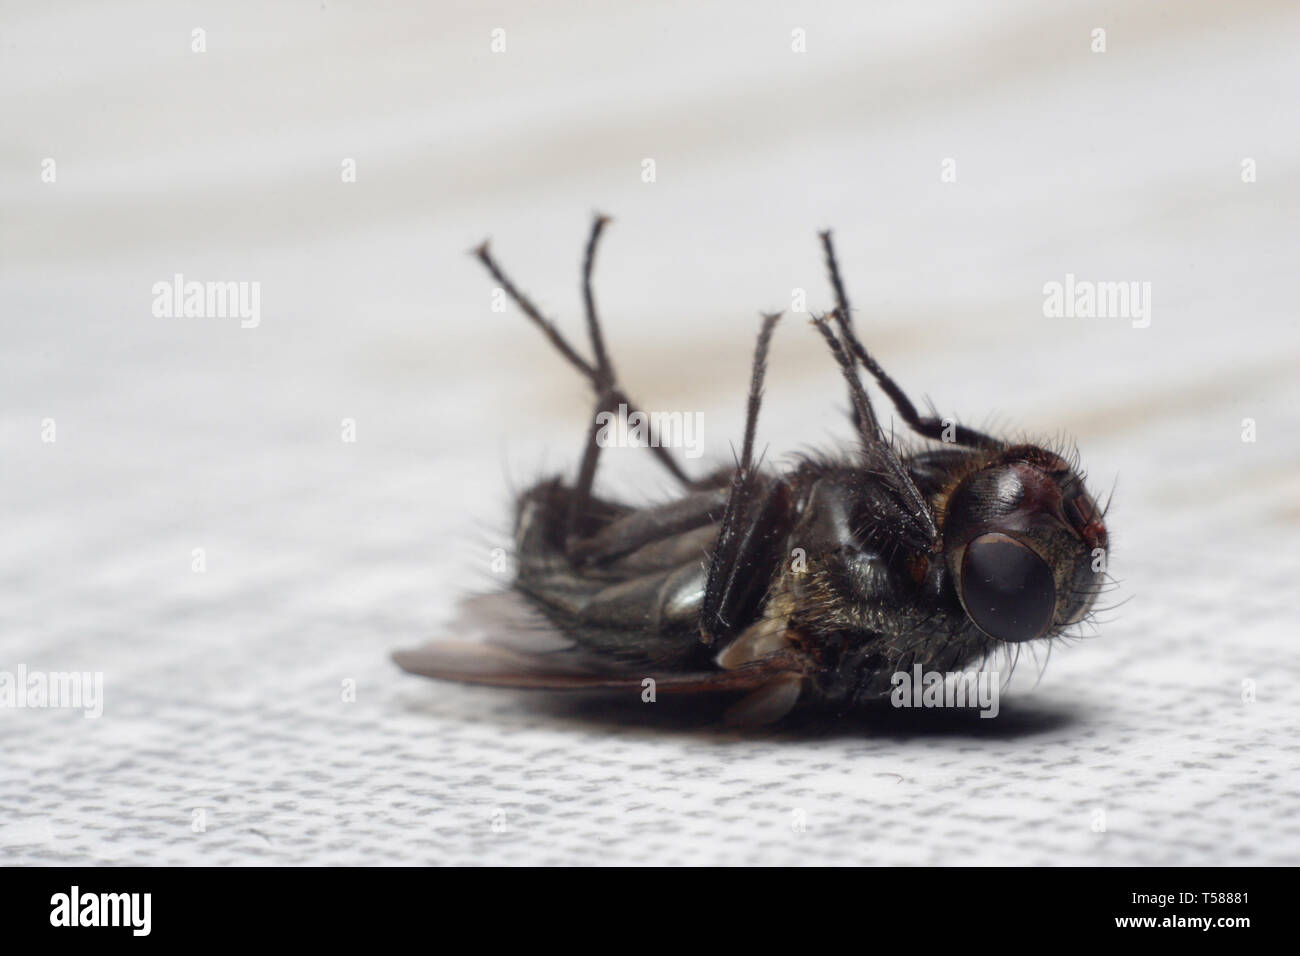 Dead fly lying on its back, isolated on white Stock Photo